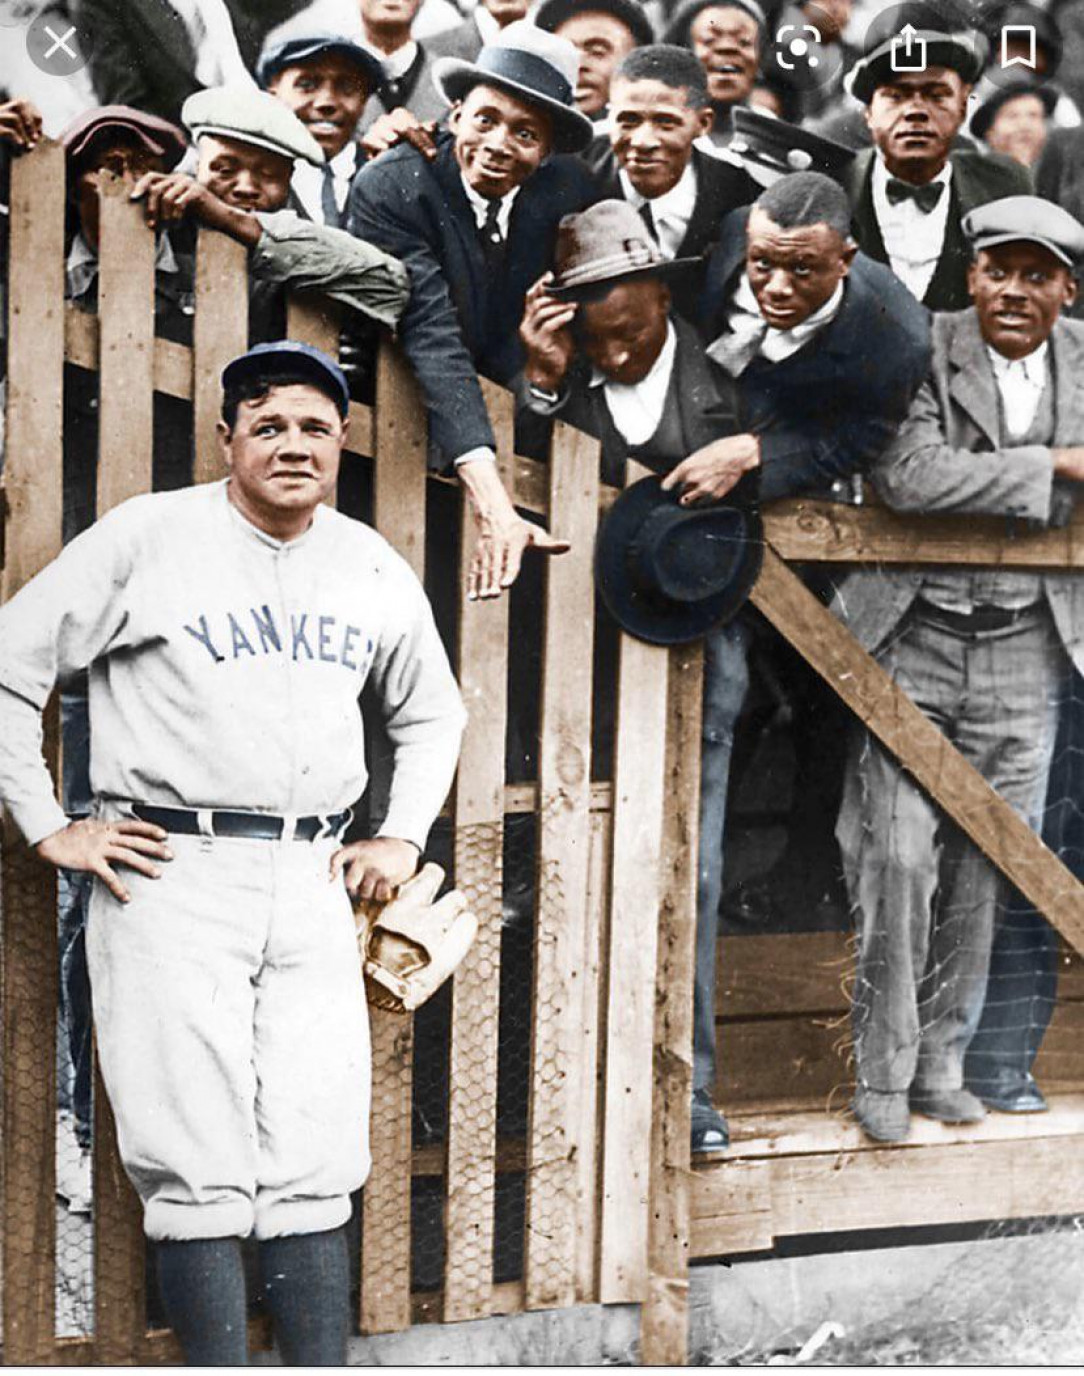 Babe Ruth poses with fans 1925